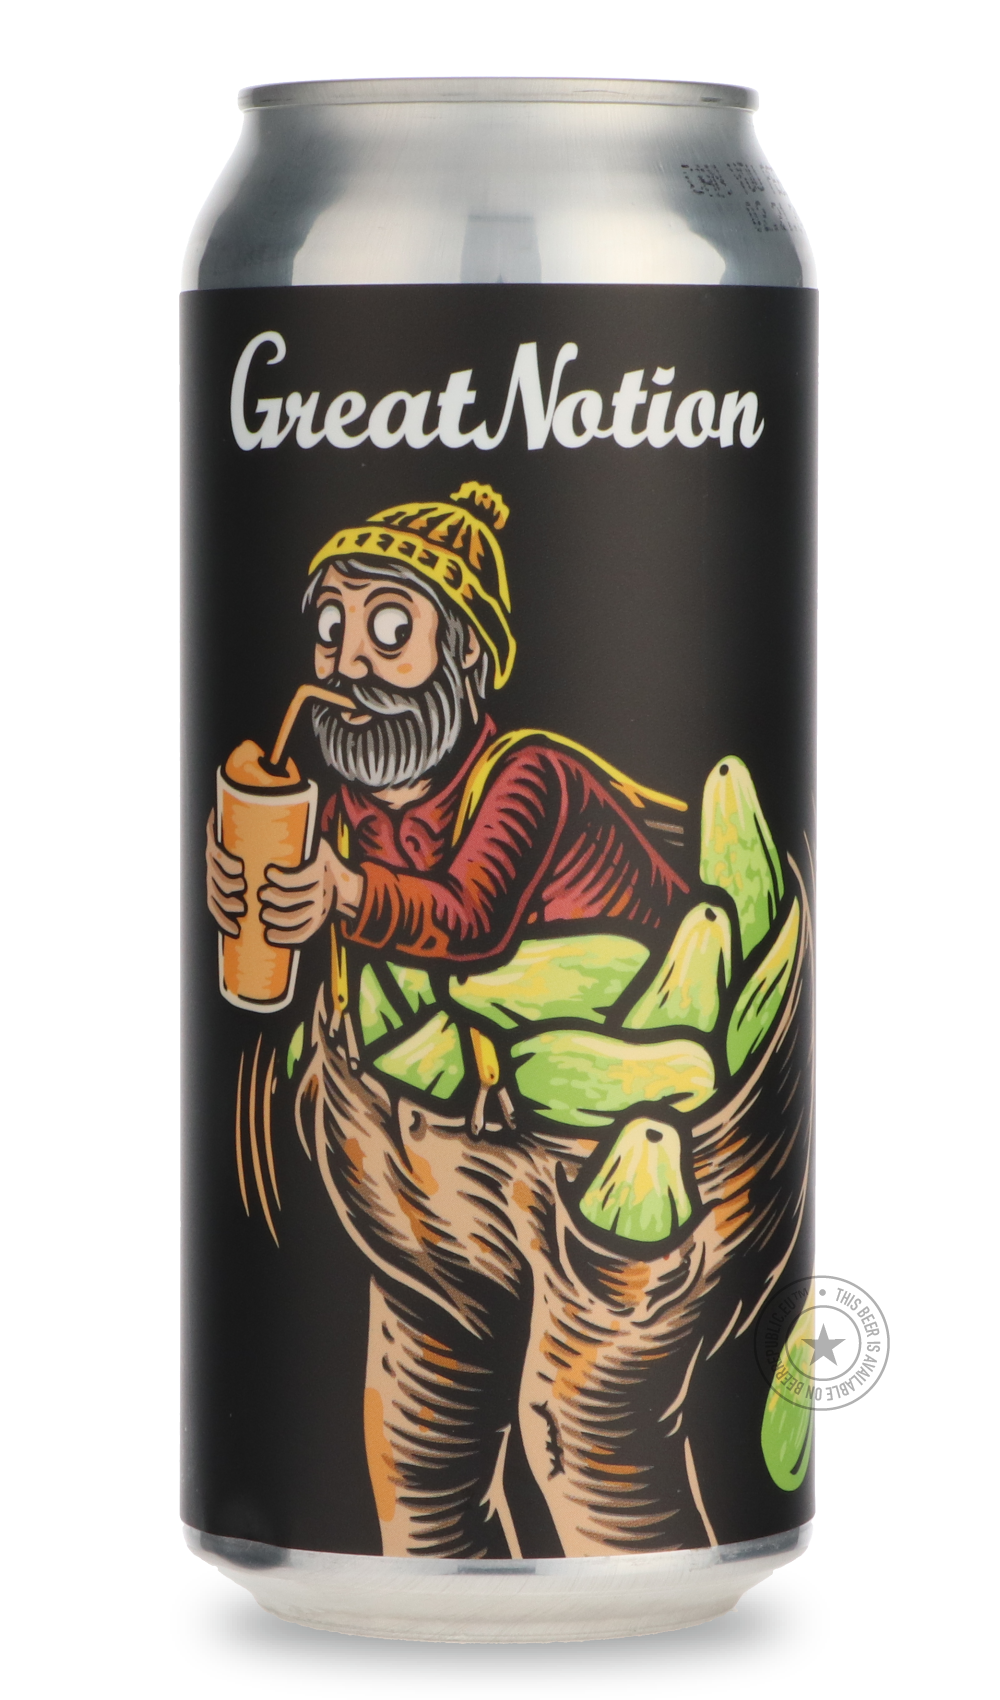 -Great Notion- Double Papaya Shake-Sour / Wild & Fruity- Only @ Beer Republic - The best online beer store for American & Canadian craft beer - Buy beer online from the USA and Canada - Bier online kopen - Amerikaans bier kopen - Craft beer store - Craft beer kopen - Amerikanisch bier kaufen - Bier online kaufen - Acheter biere online - IPA - Stout - Porter - New England IPA - Hazy IPA - Imperial Stout - Barrel Aged - Barrel Aged Imperial Stout - Brown - Dark beer - Blond - Blonde - Pilsner - Lager - Wheat 